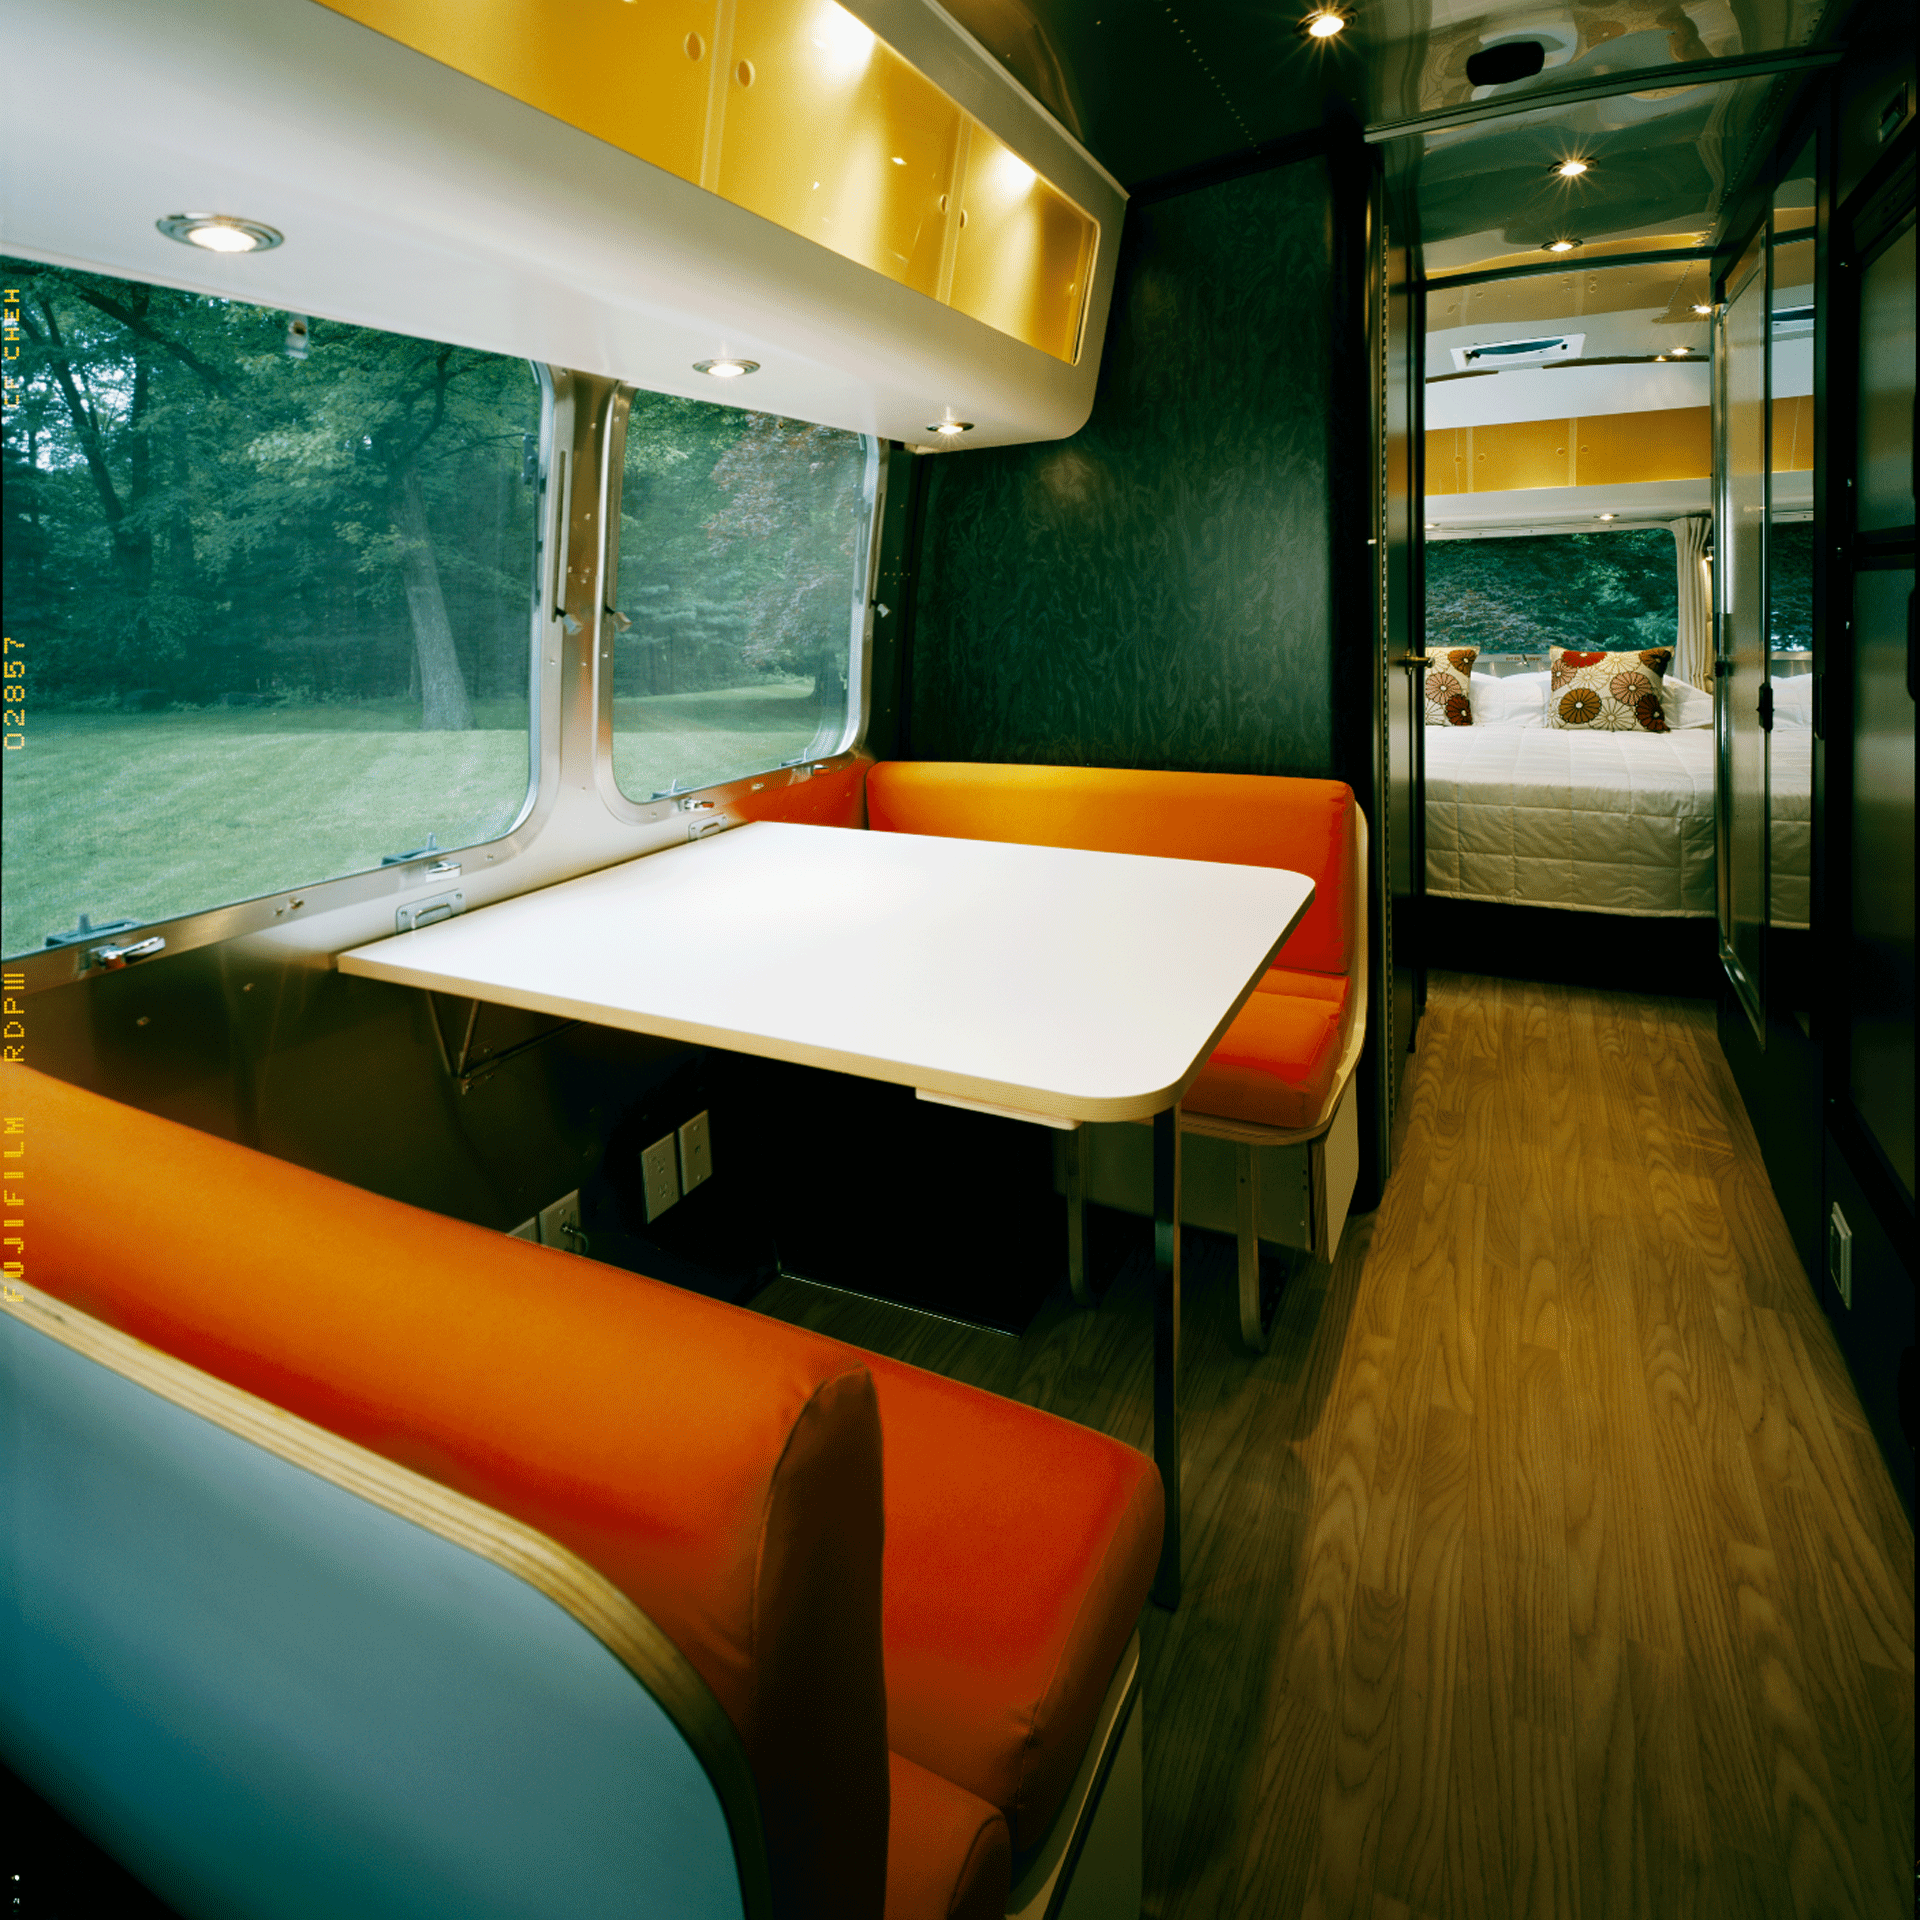 The inside decor of an Airstream International travel trailer from 2010.